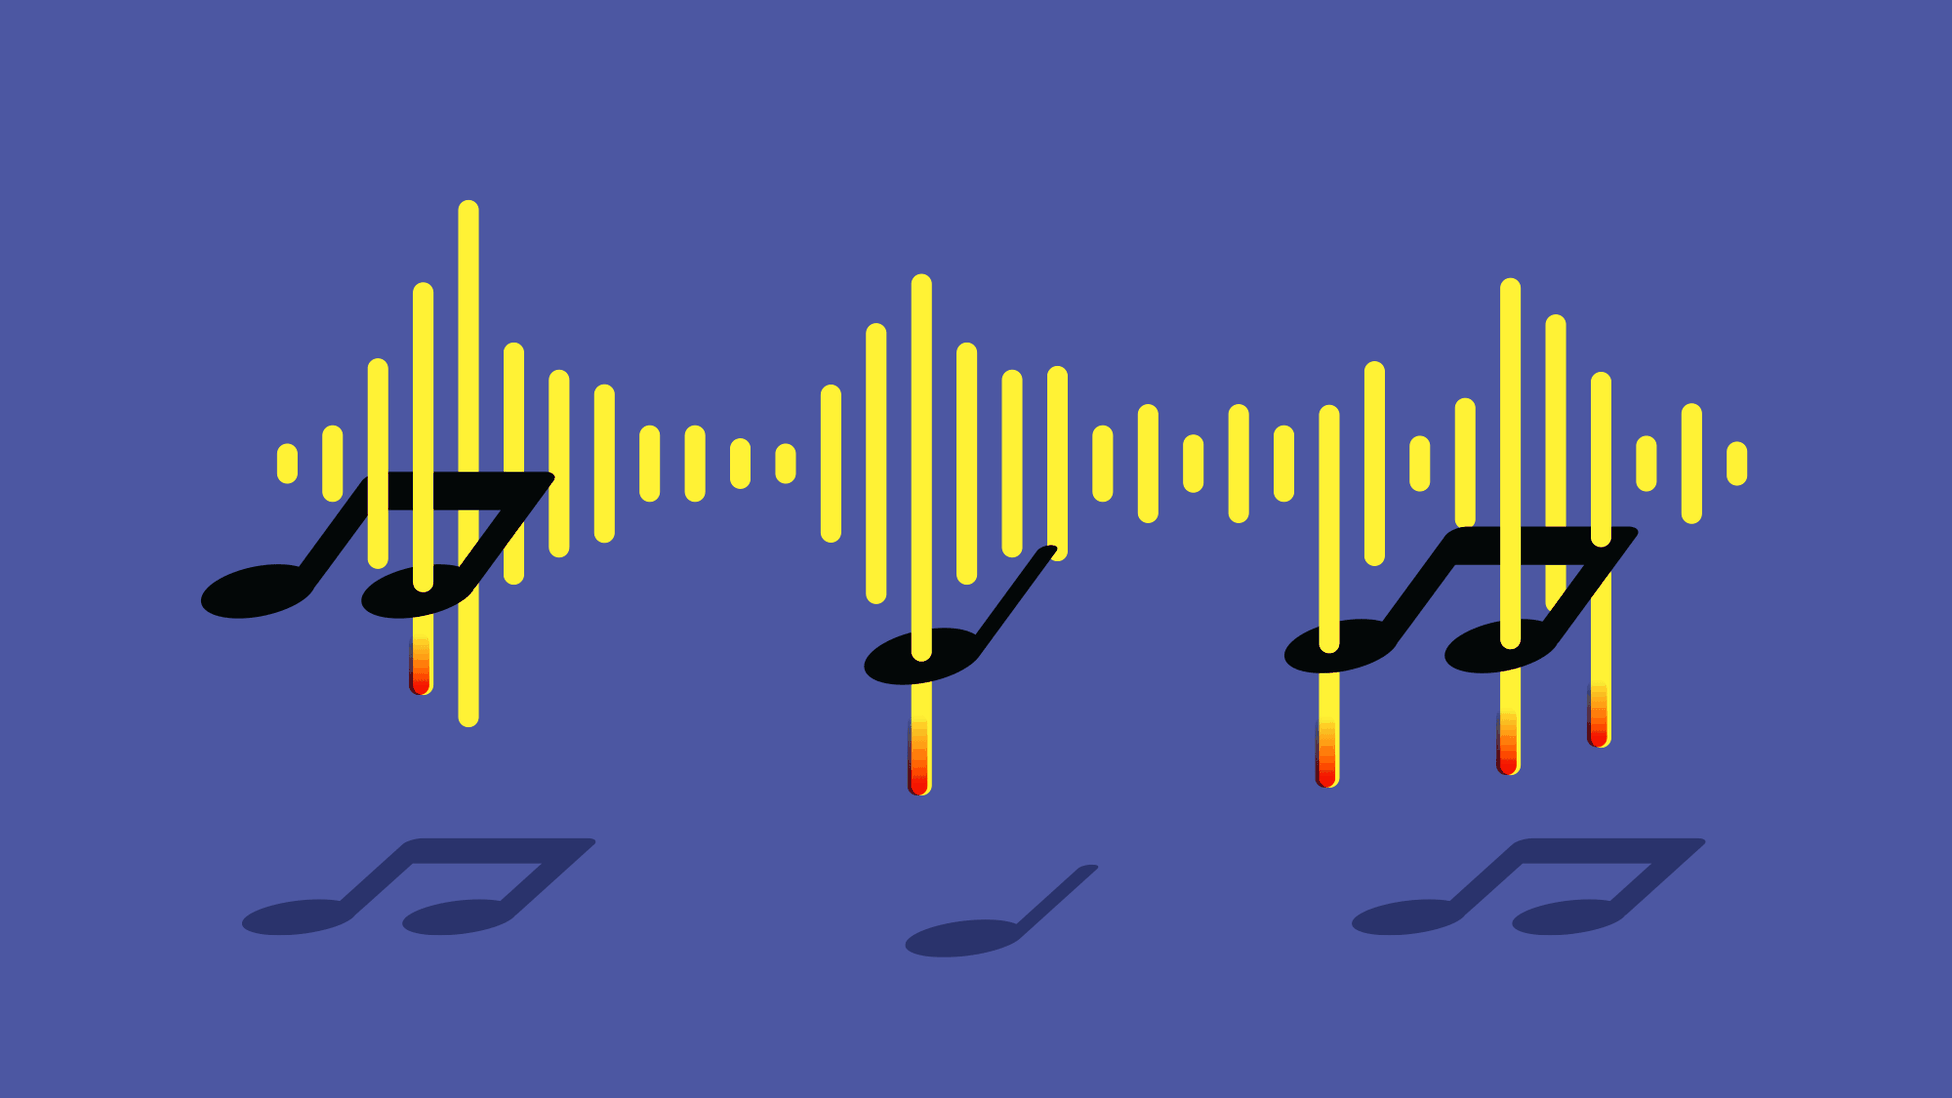 Graphic image showing soundwaves and musical notes